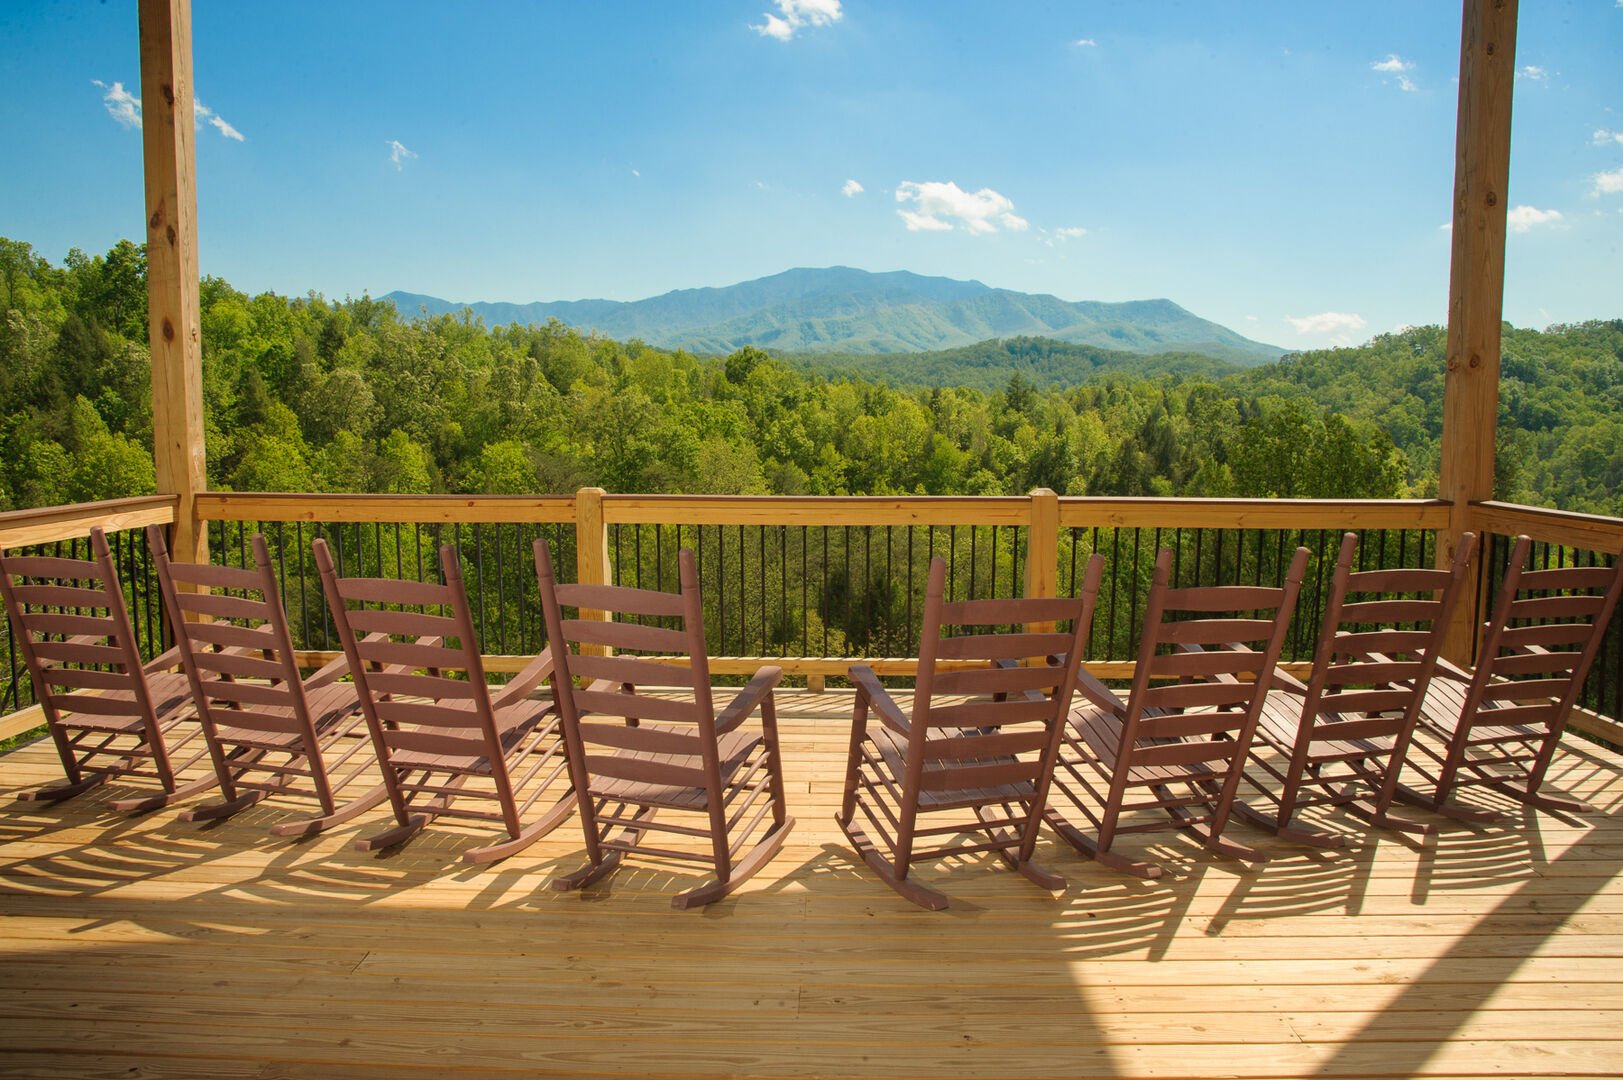 Enjoy Mountain Views From Rocking Chairs on Deck.